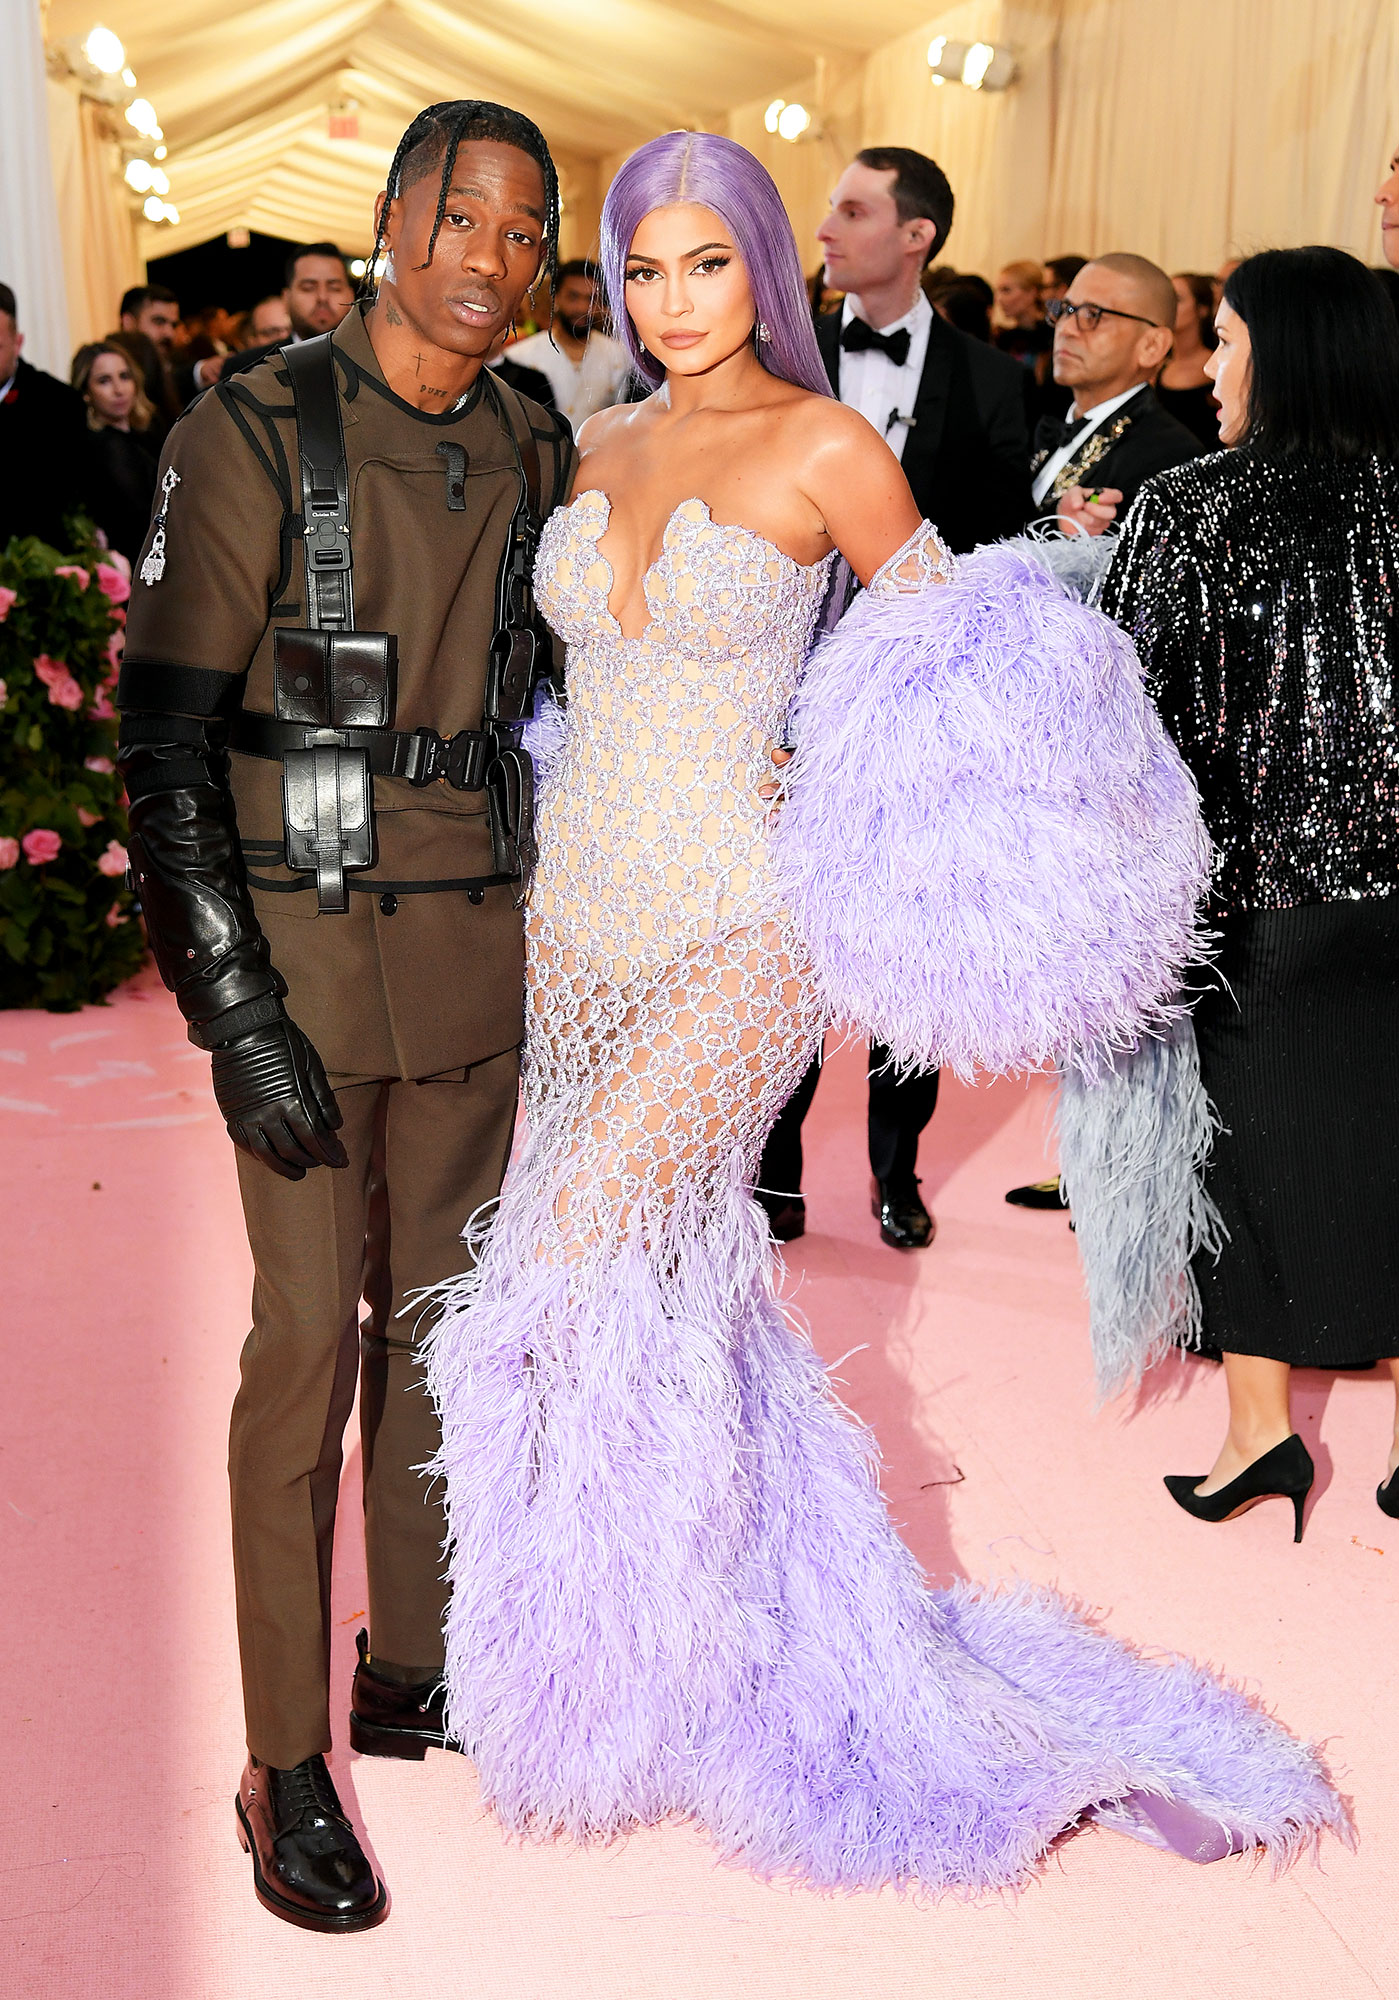 Travis Scott and Kylie Jenner met gala 2019 couples